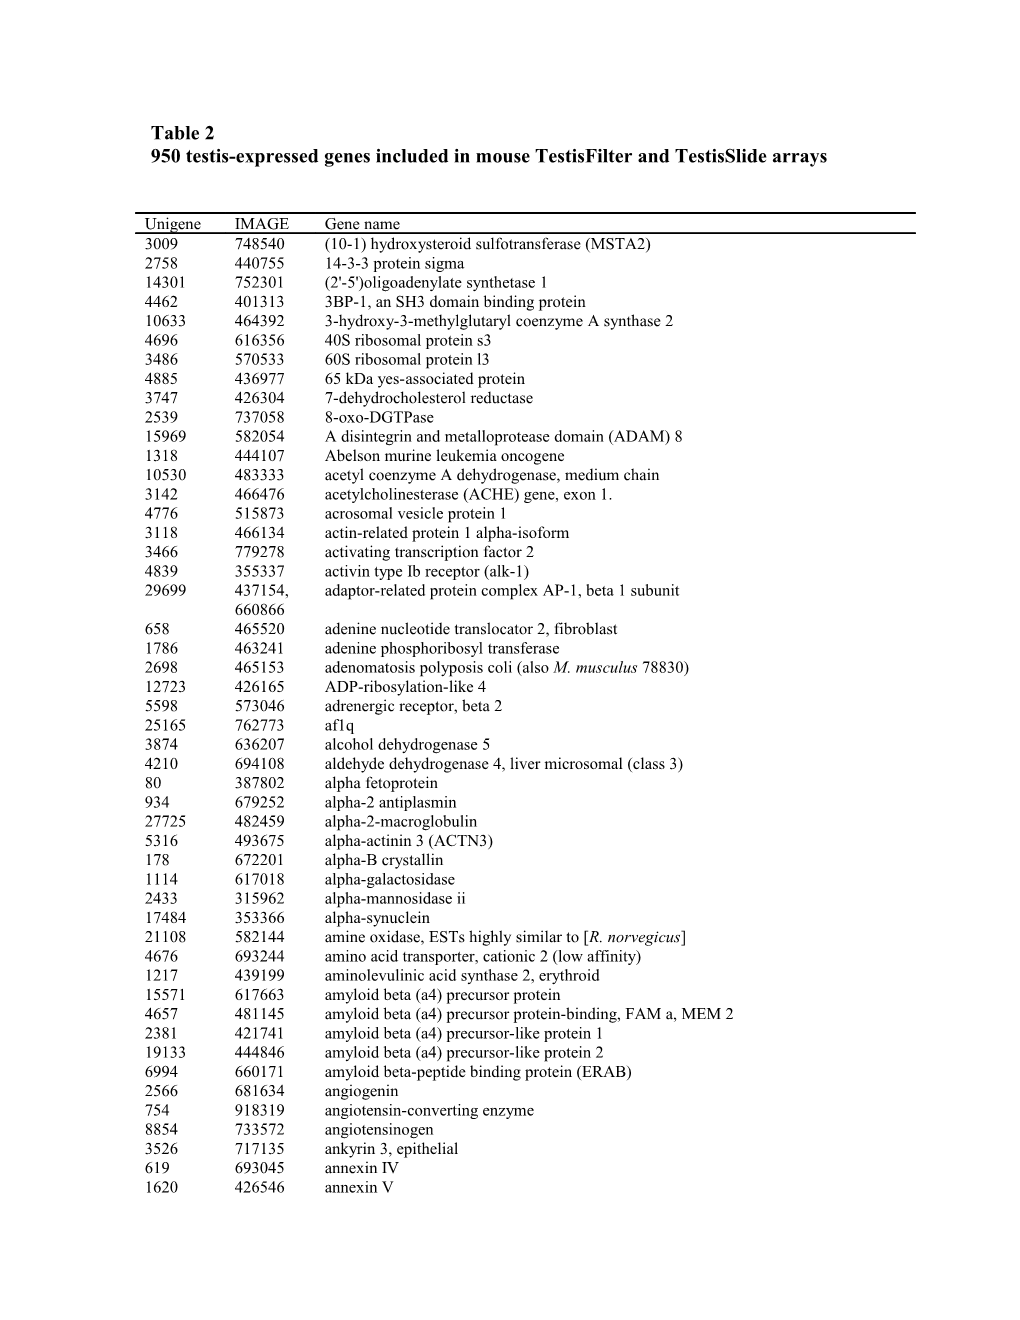 Table 1 - 959 Genes Included in Mouse Testisfilter and Testisslide Arrays